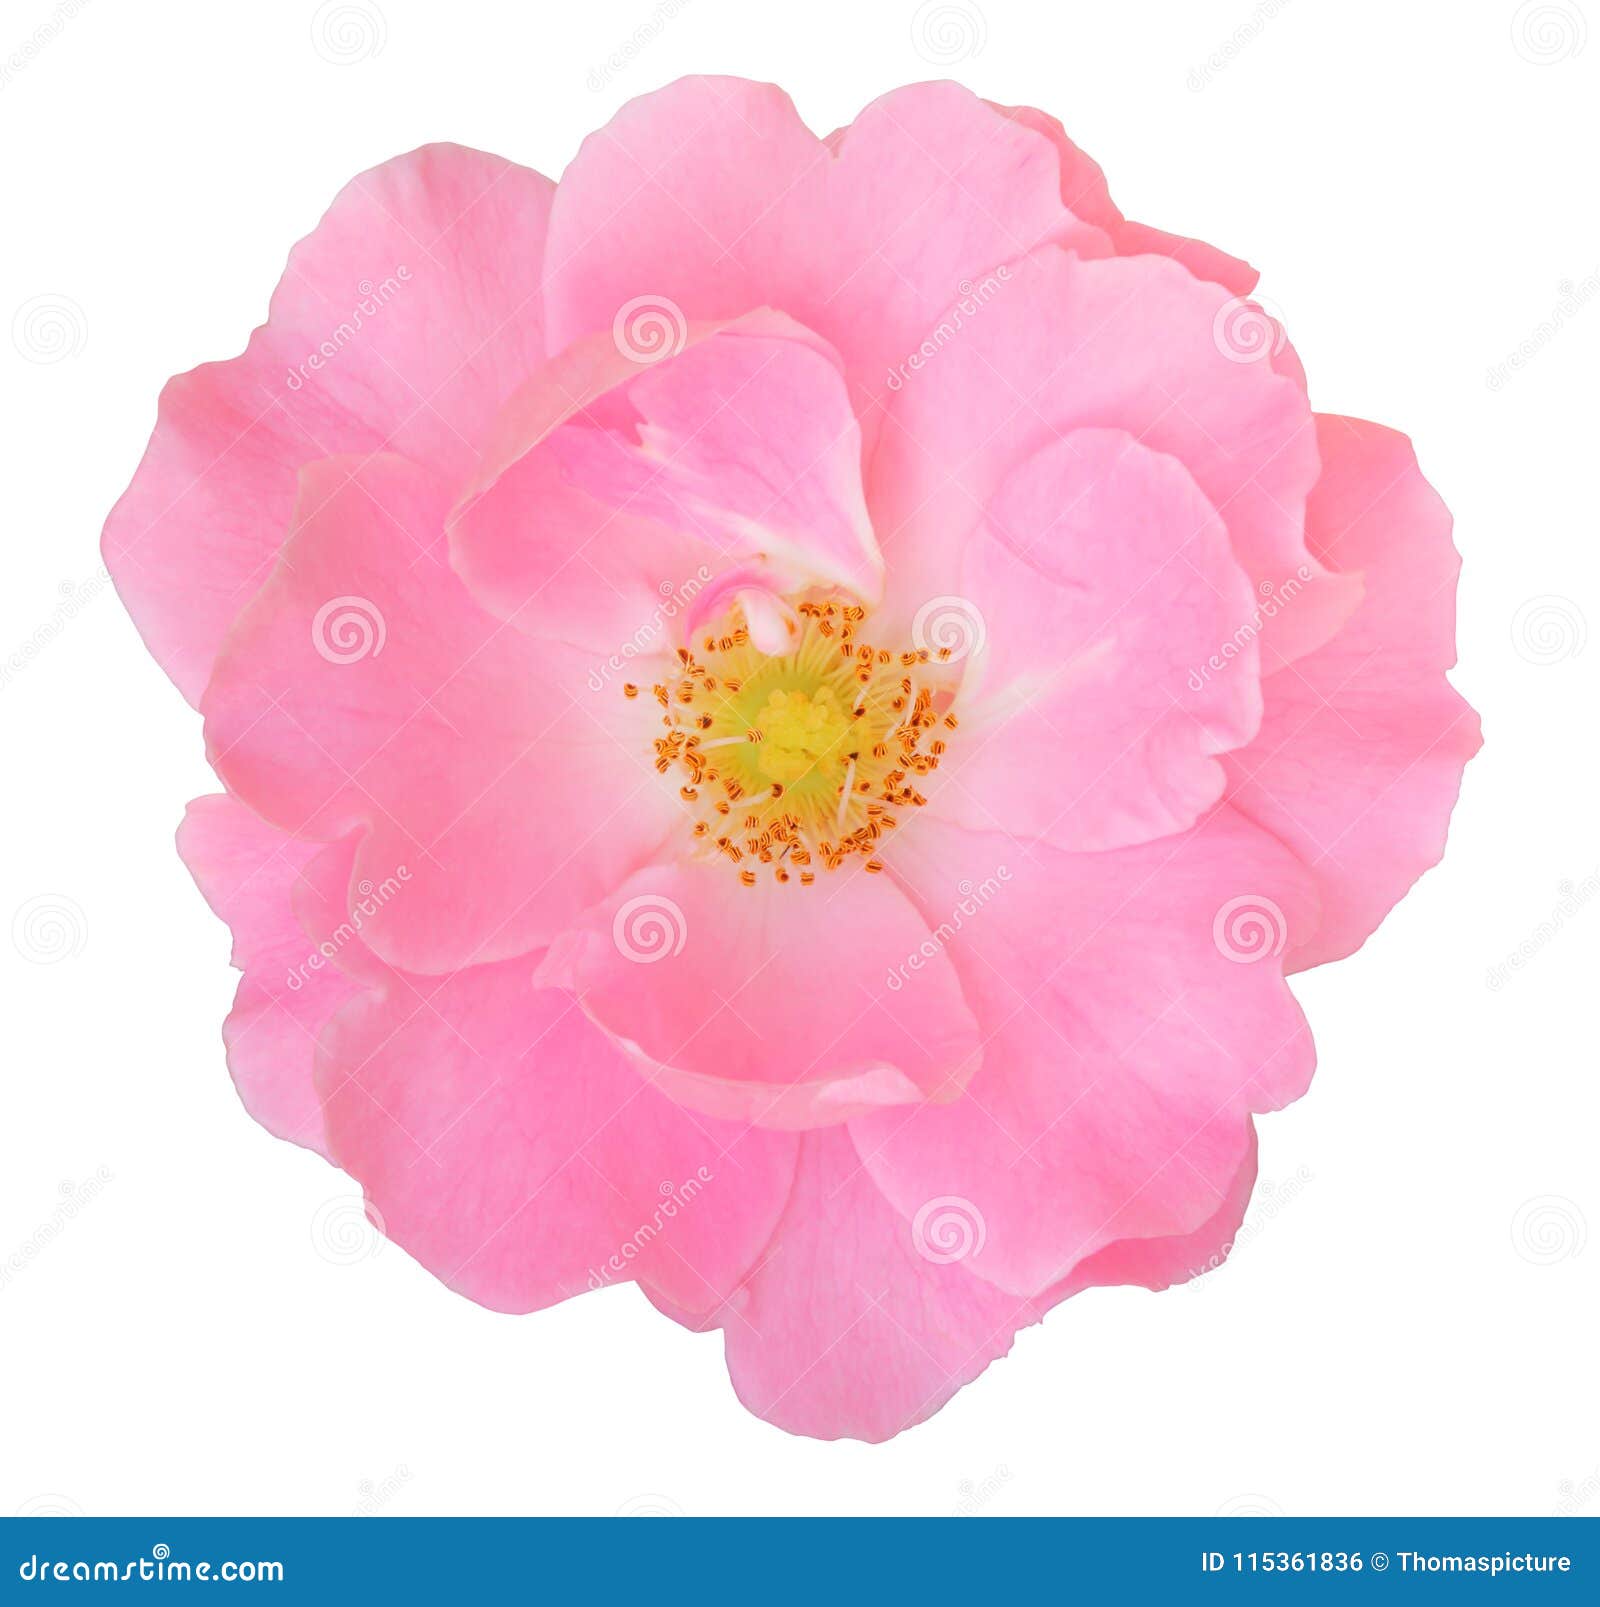 pink rose rosaceae  on white background, including clipping path.